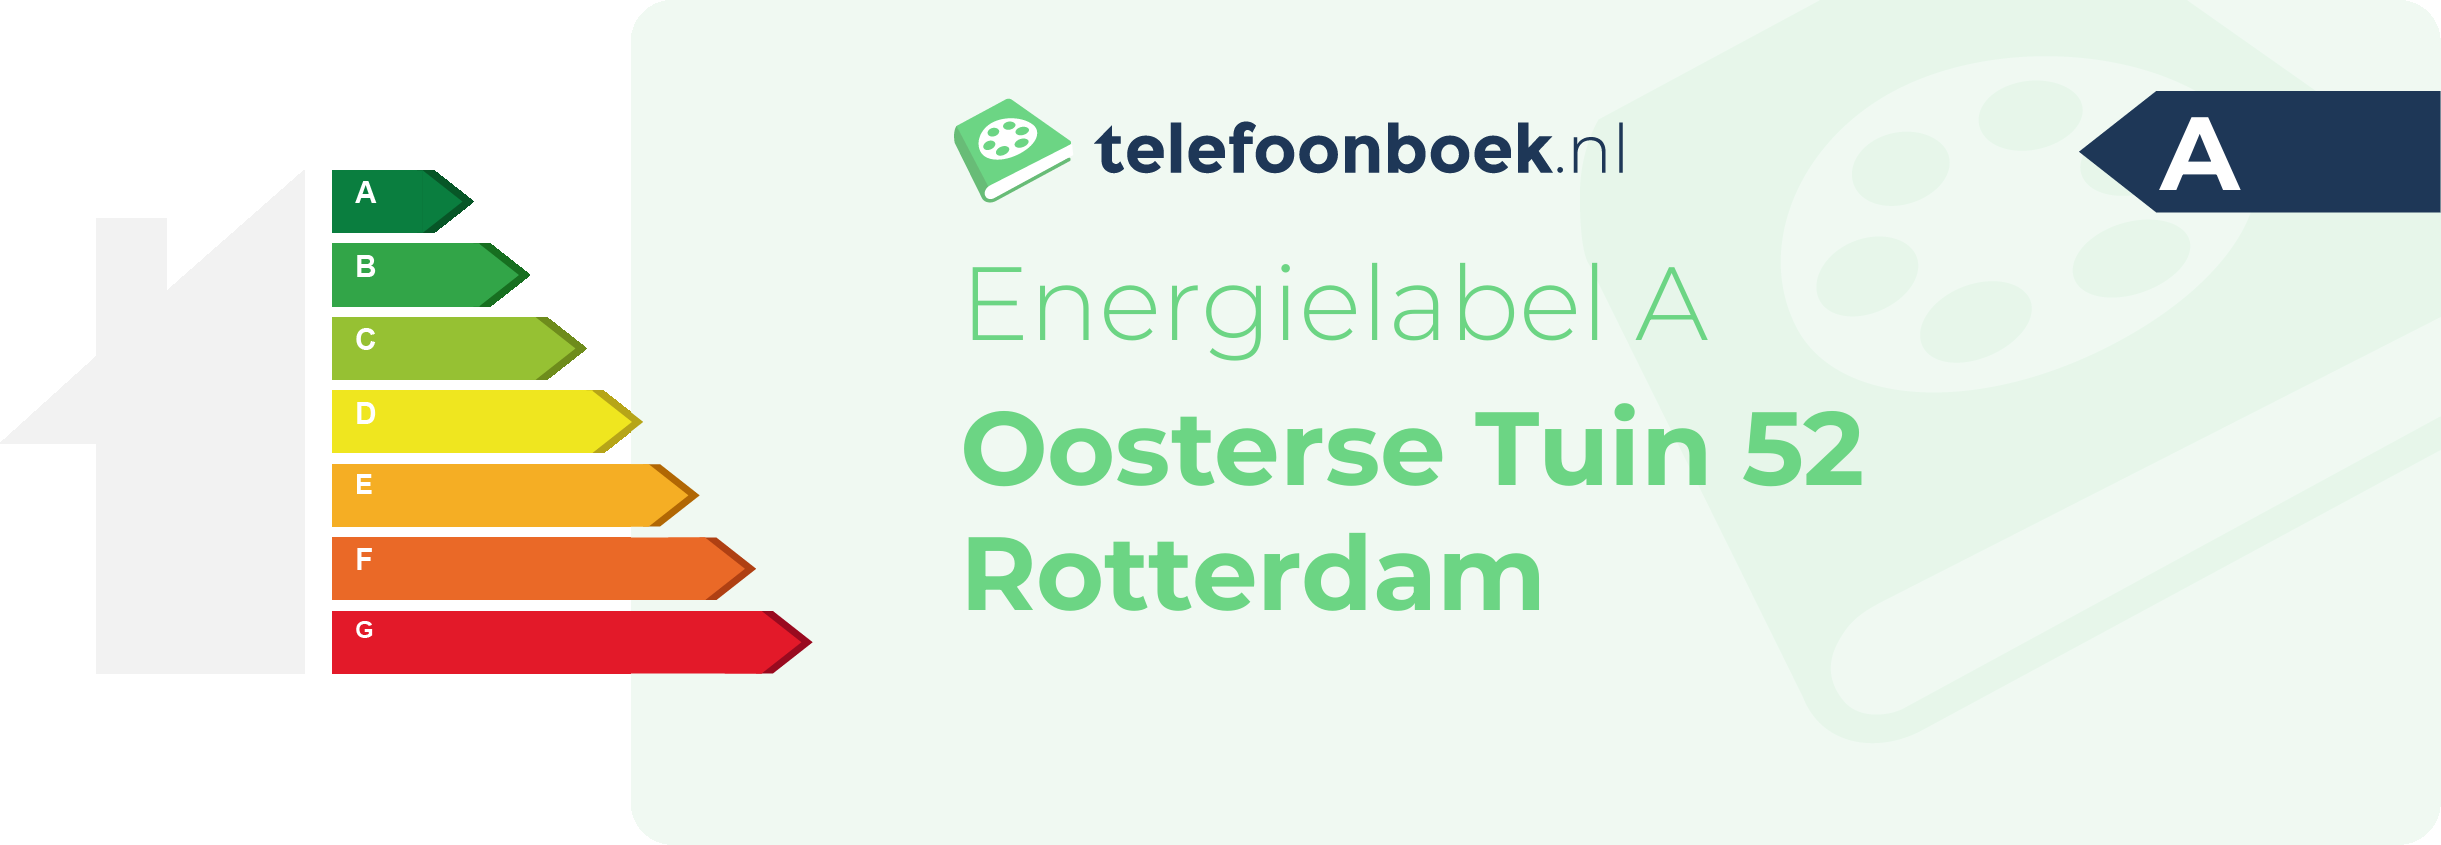 Energielabel Oosterse Tuin 52 Rotterdam